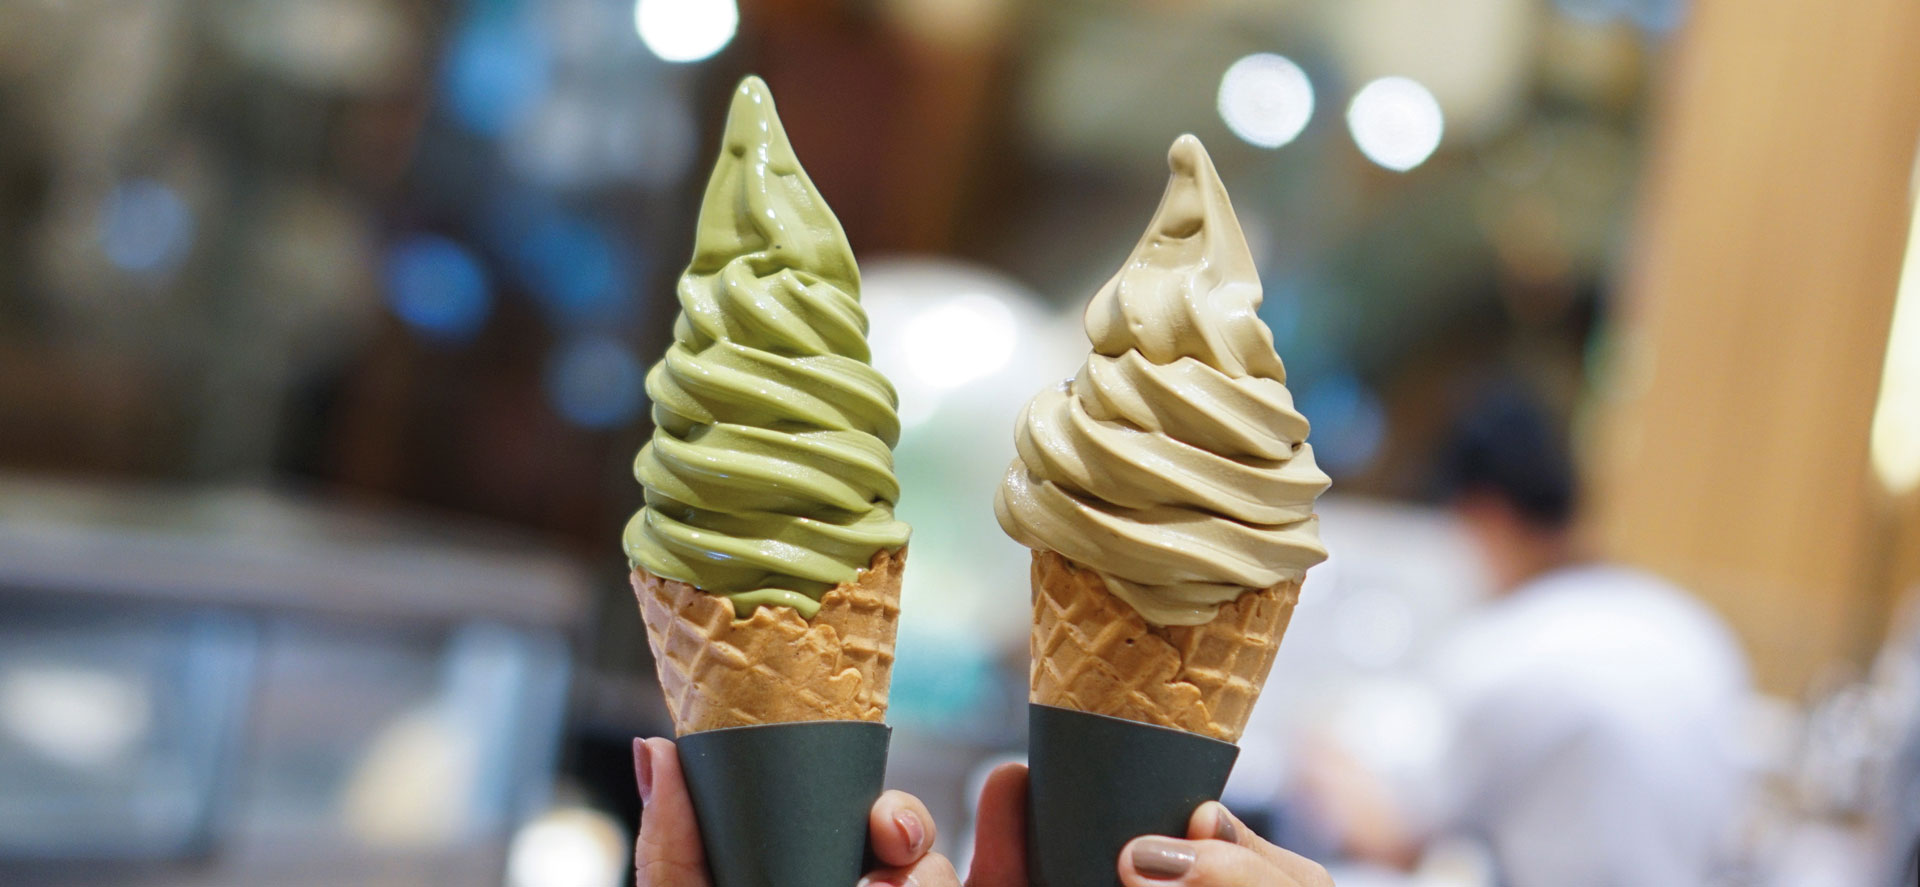 Two soft-serve ice cream cones being held